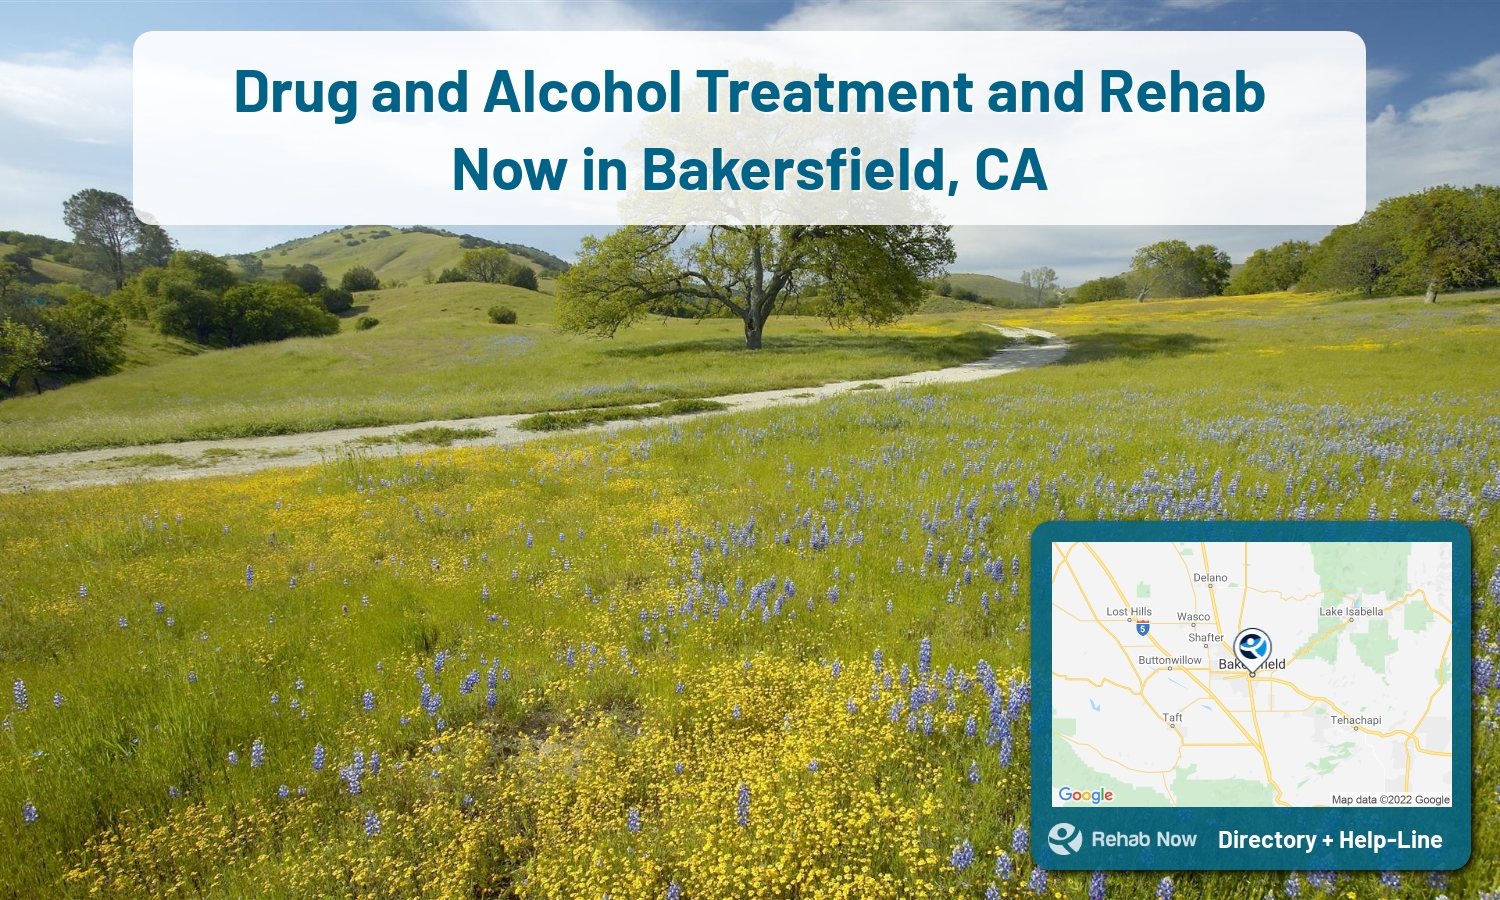 Bakersfield, CA Treatment Centers. Find drug rehab in Bakersfield, California, or detox and treatment programs. Get the right help now!